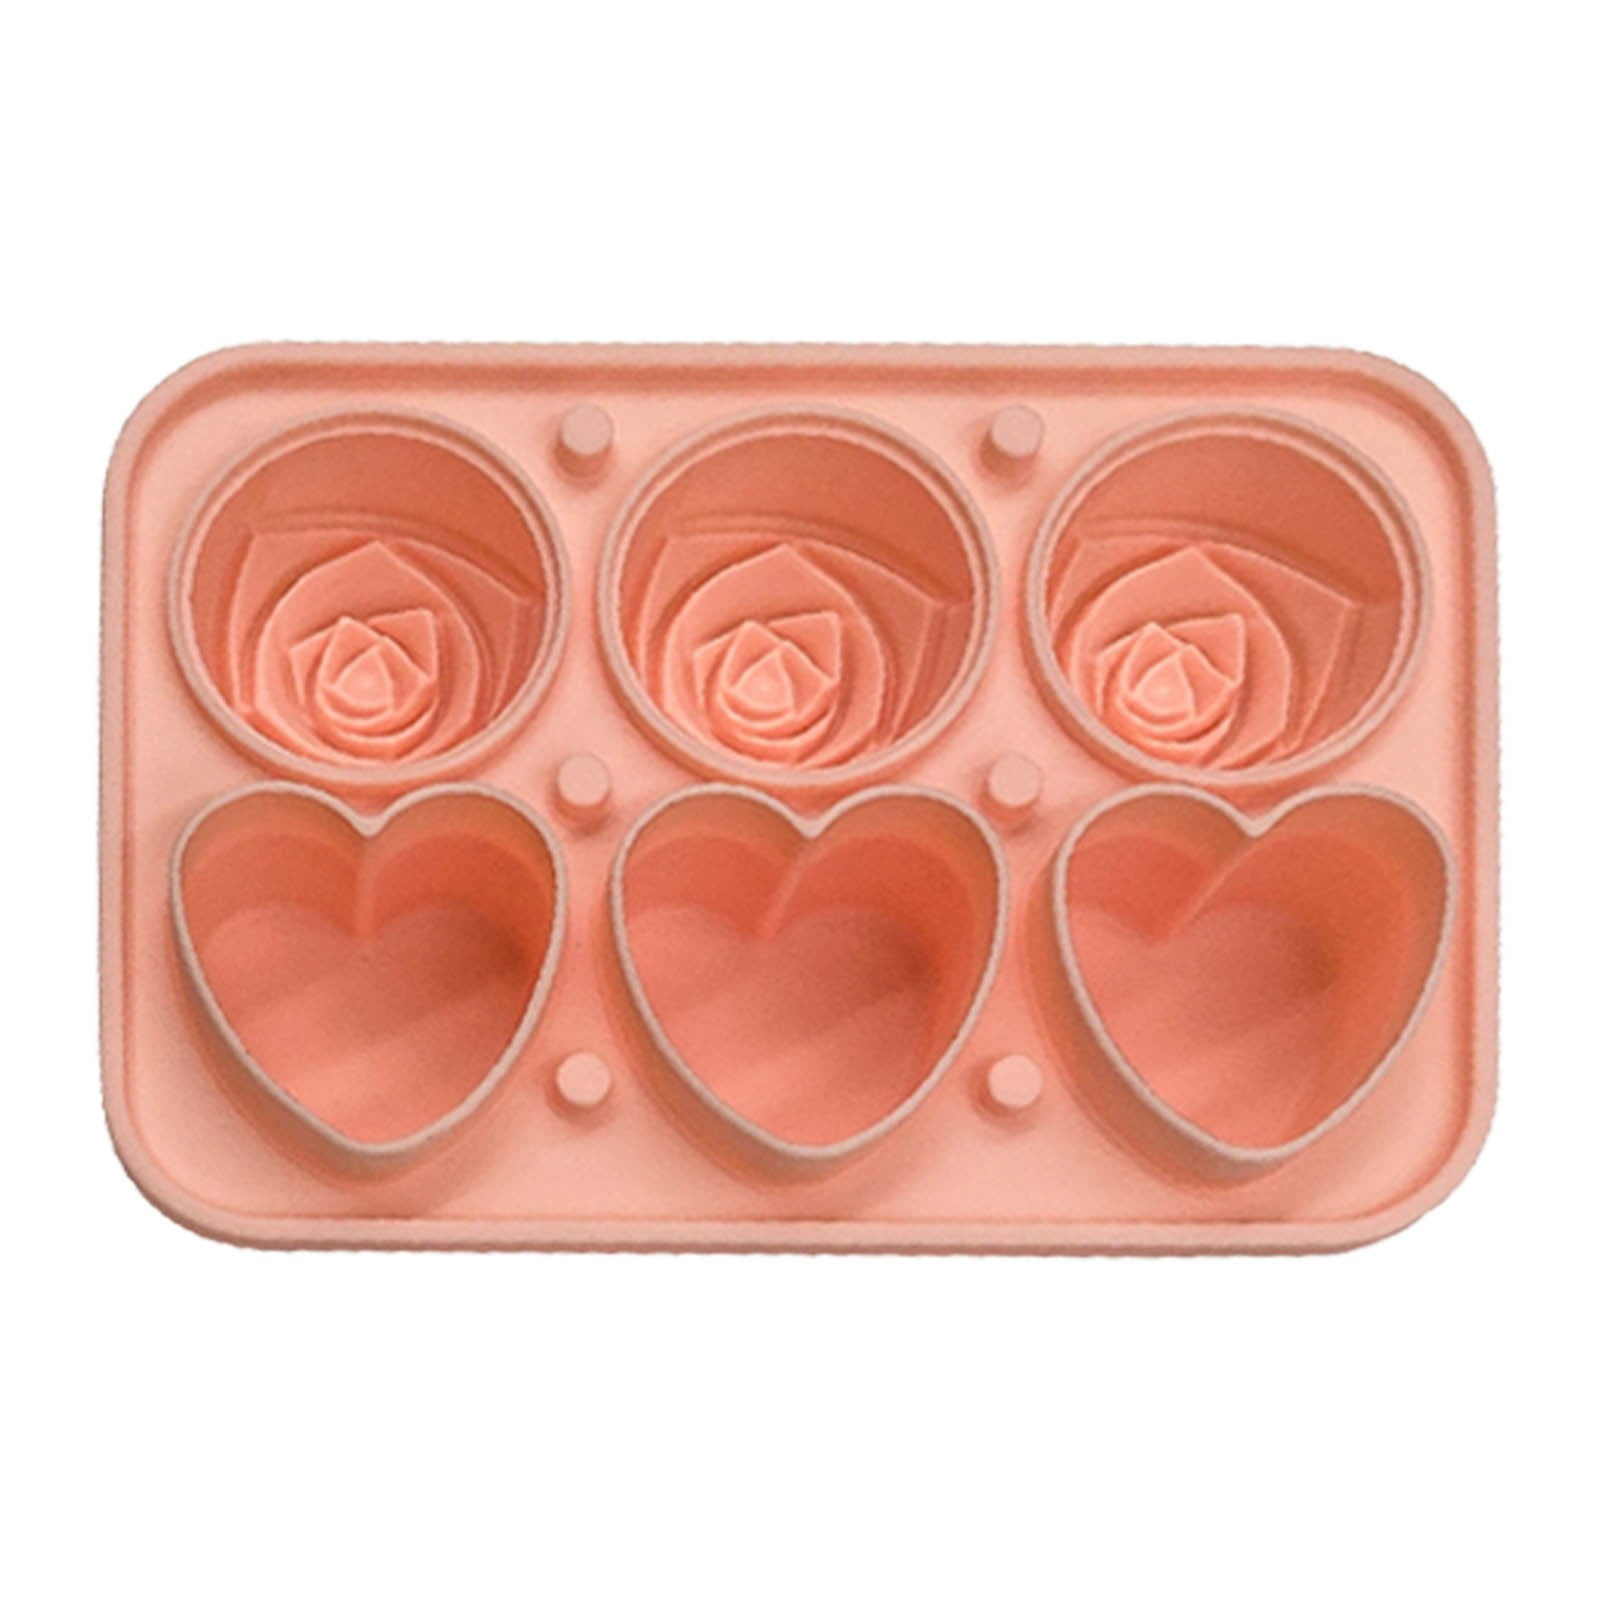 Baking Moulds Rose Ice Molds Large Cube Trays Make 6 Giant Cute Flower  Shape Silicone Rubber Fun Big Ball Maker From Paronas, $12.36